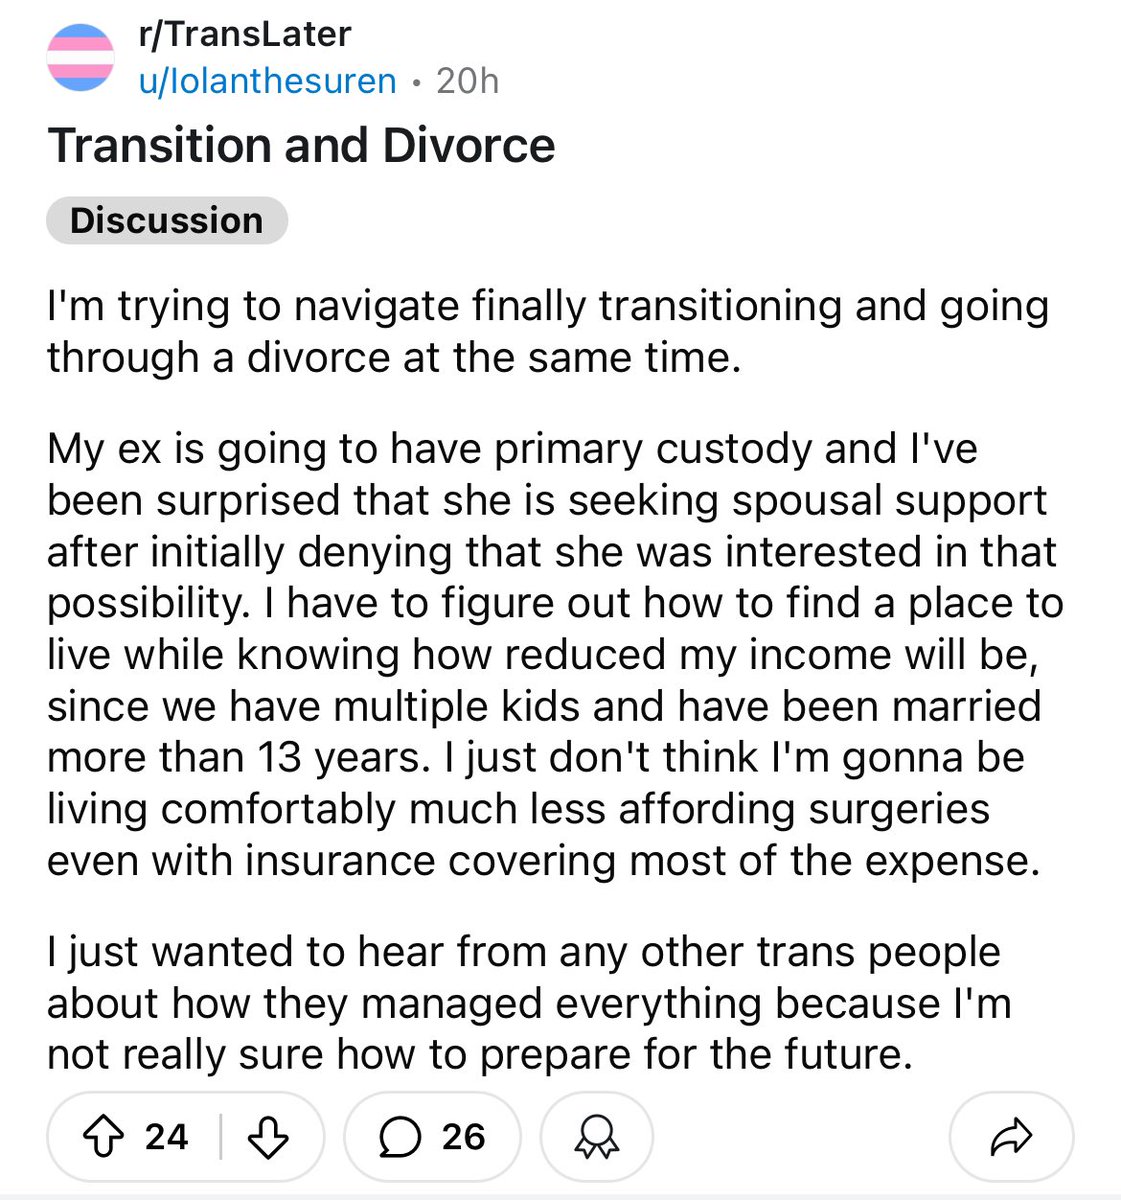 Man “tr&nsitions” and tears apart his 13 year marriage when he has multiple kids. Wife takes him to the freaking cleaners and now he can’t even afford his gender surgeries LOLOLOL 😂